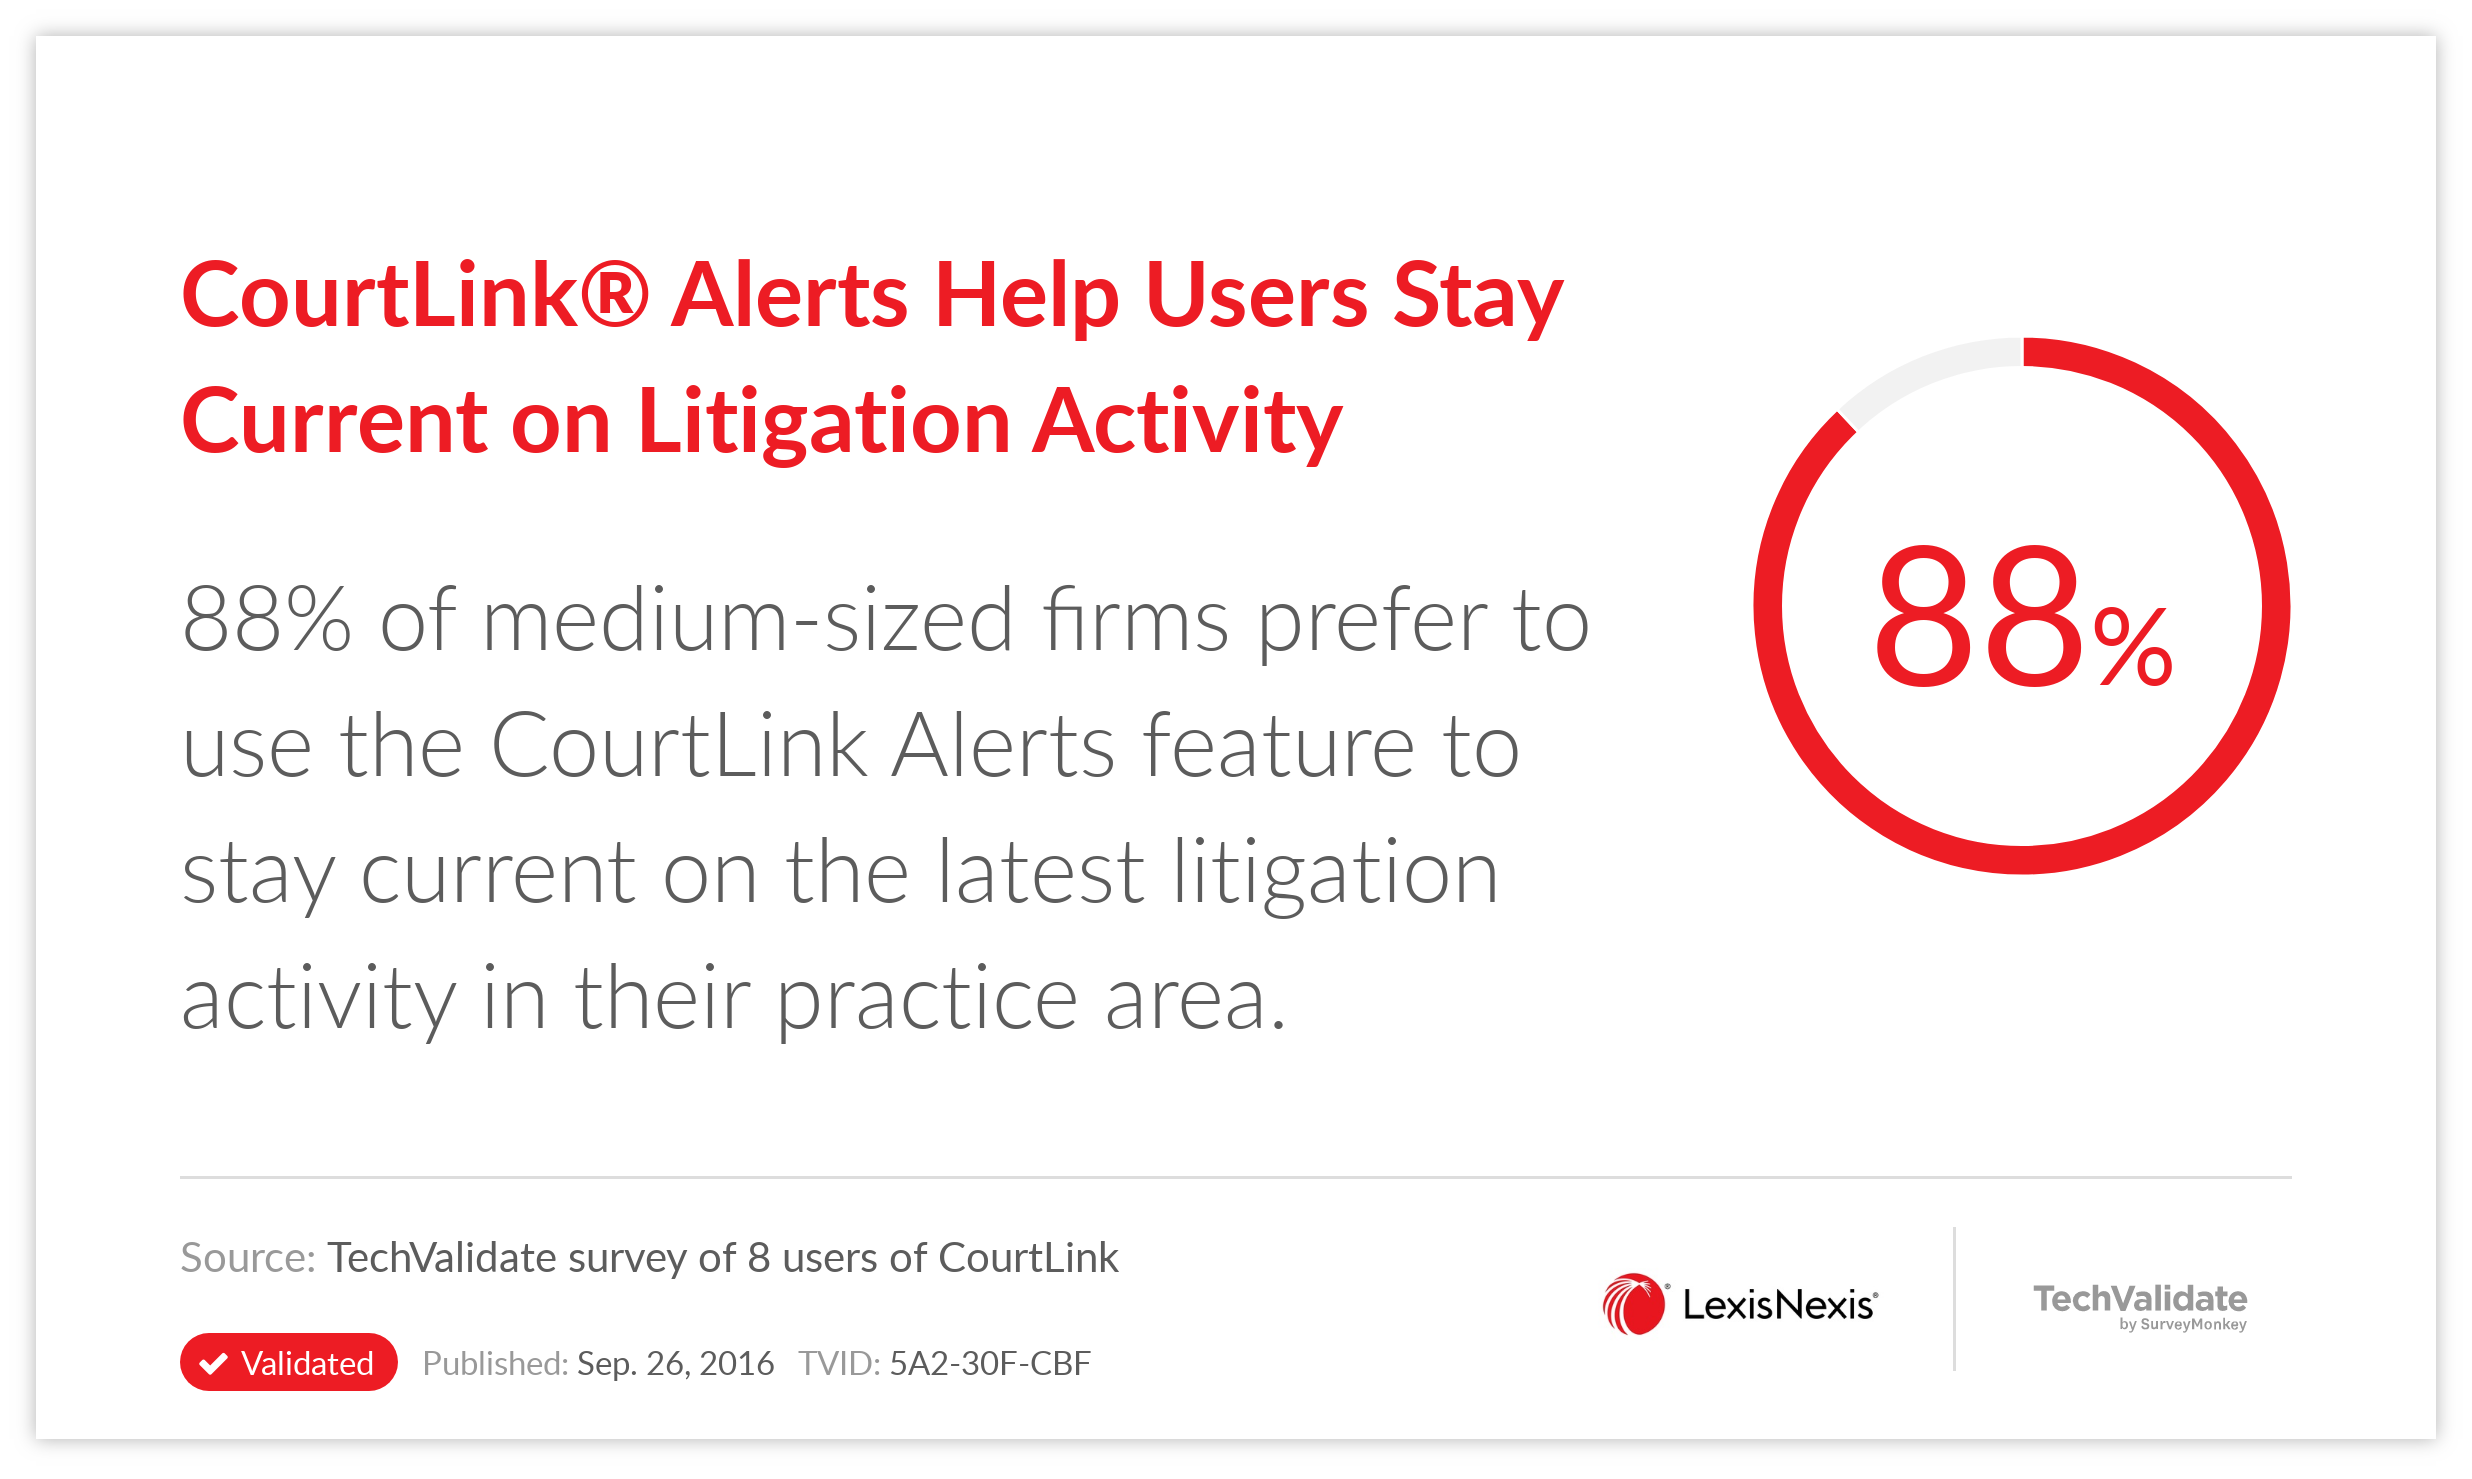 CourtLink(R) Alerts Help Users Stay Current on Litigation Activity